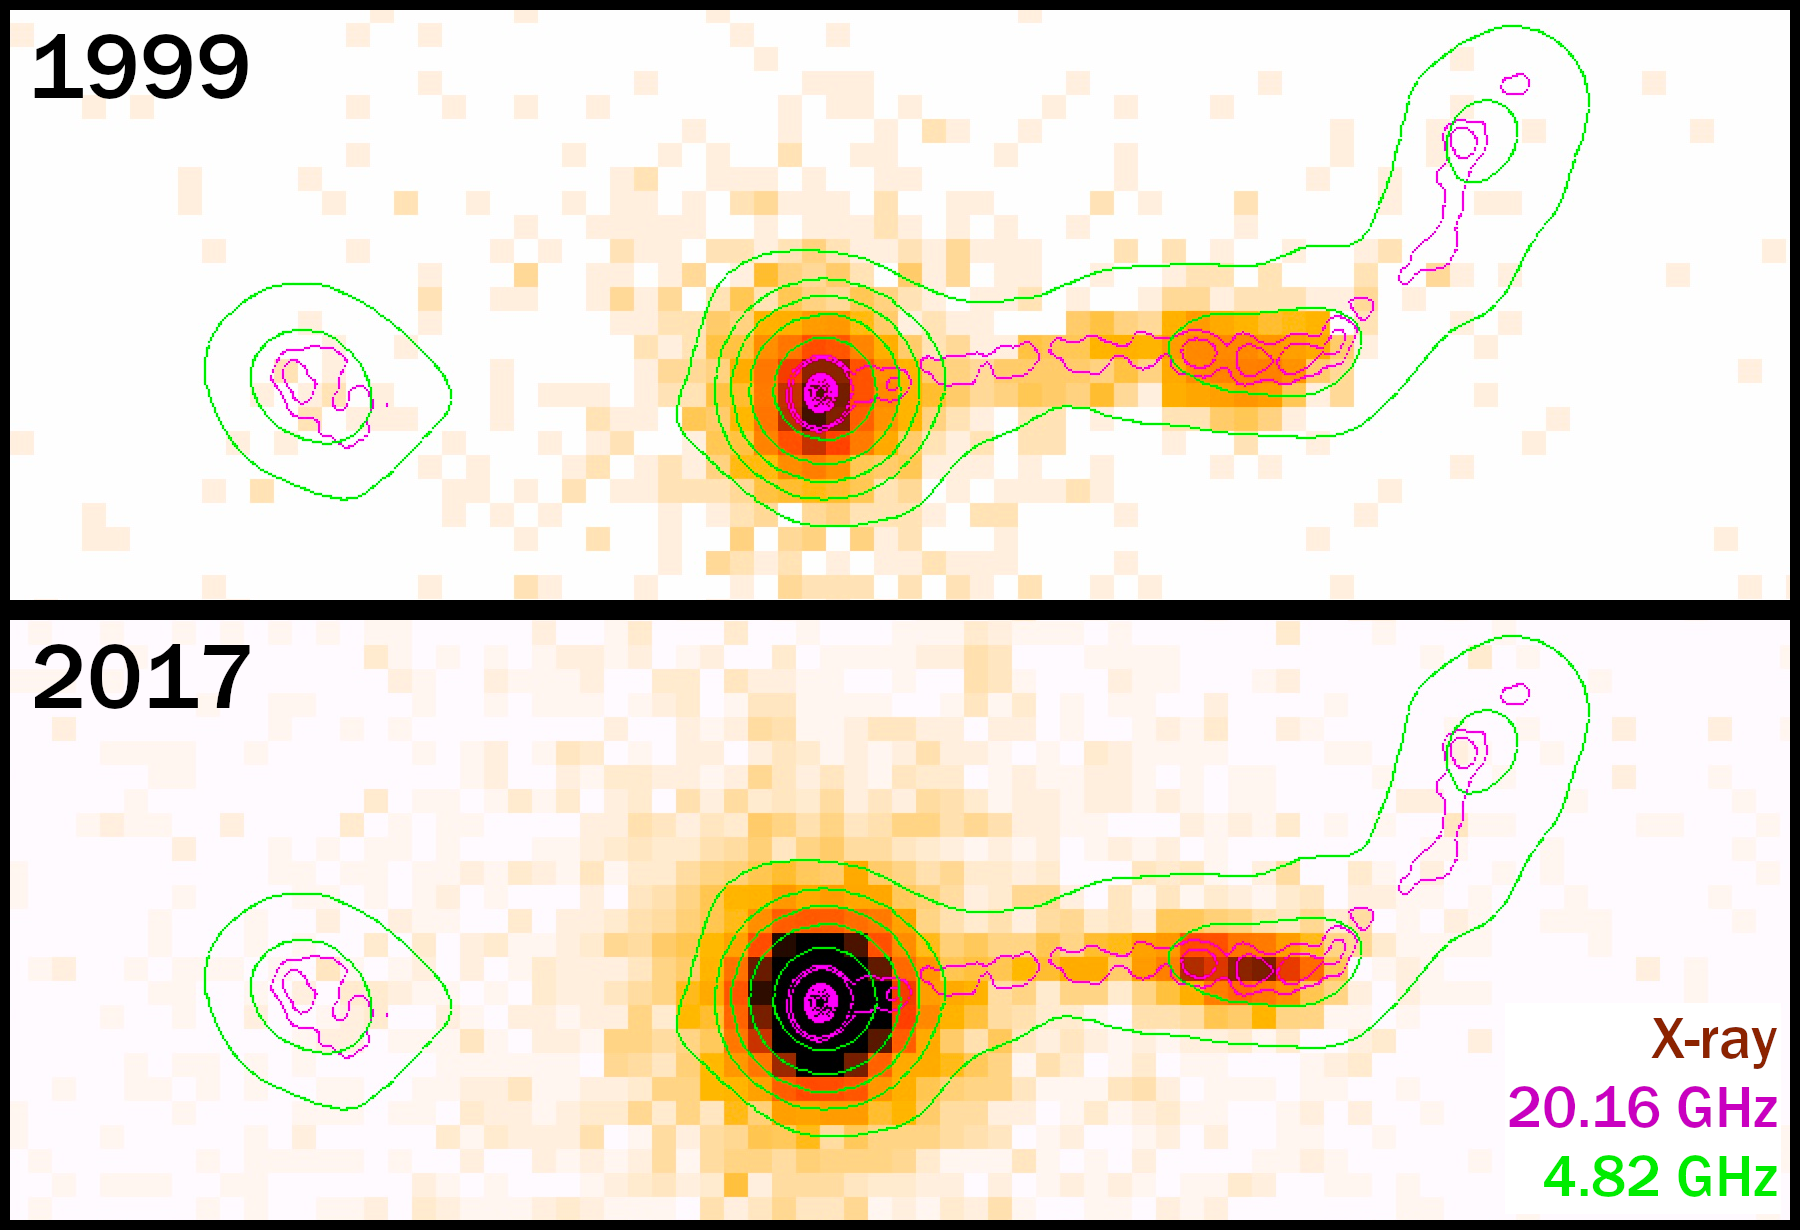 Two panels, stacked vertically, each showing a yellow, red, and black image with green and purple sets of contours. They are labeled by year, with 1999 on the top and 2017 on the bottom. Both panels, in both images and contours, show a central, circular source with an extension to the right. The contours, however, bend upward at the end of this protrusion, while the images terminate. There is a second, smaller source in the contours to the left of the main object that is seen faintly in the upper image, as well.